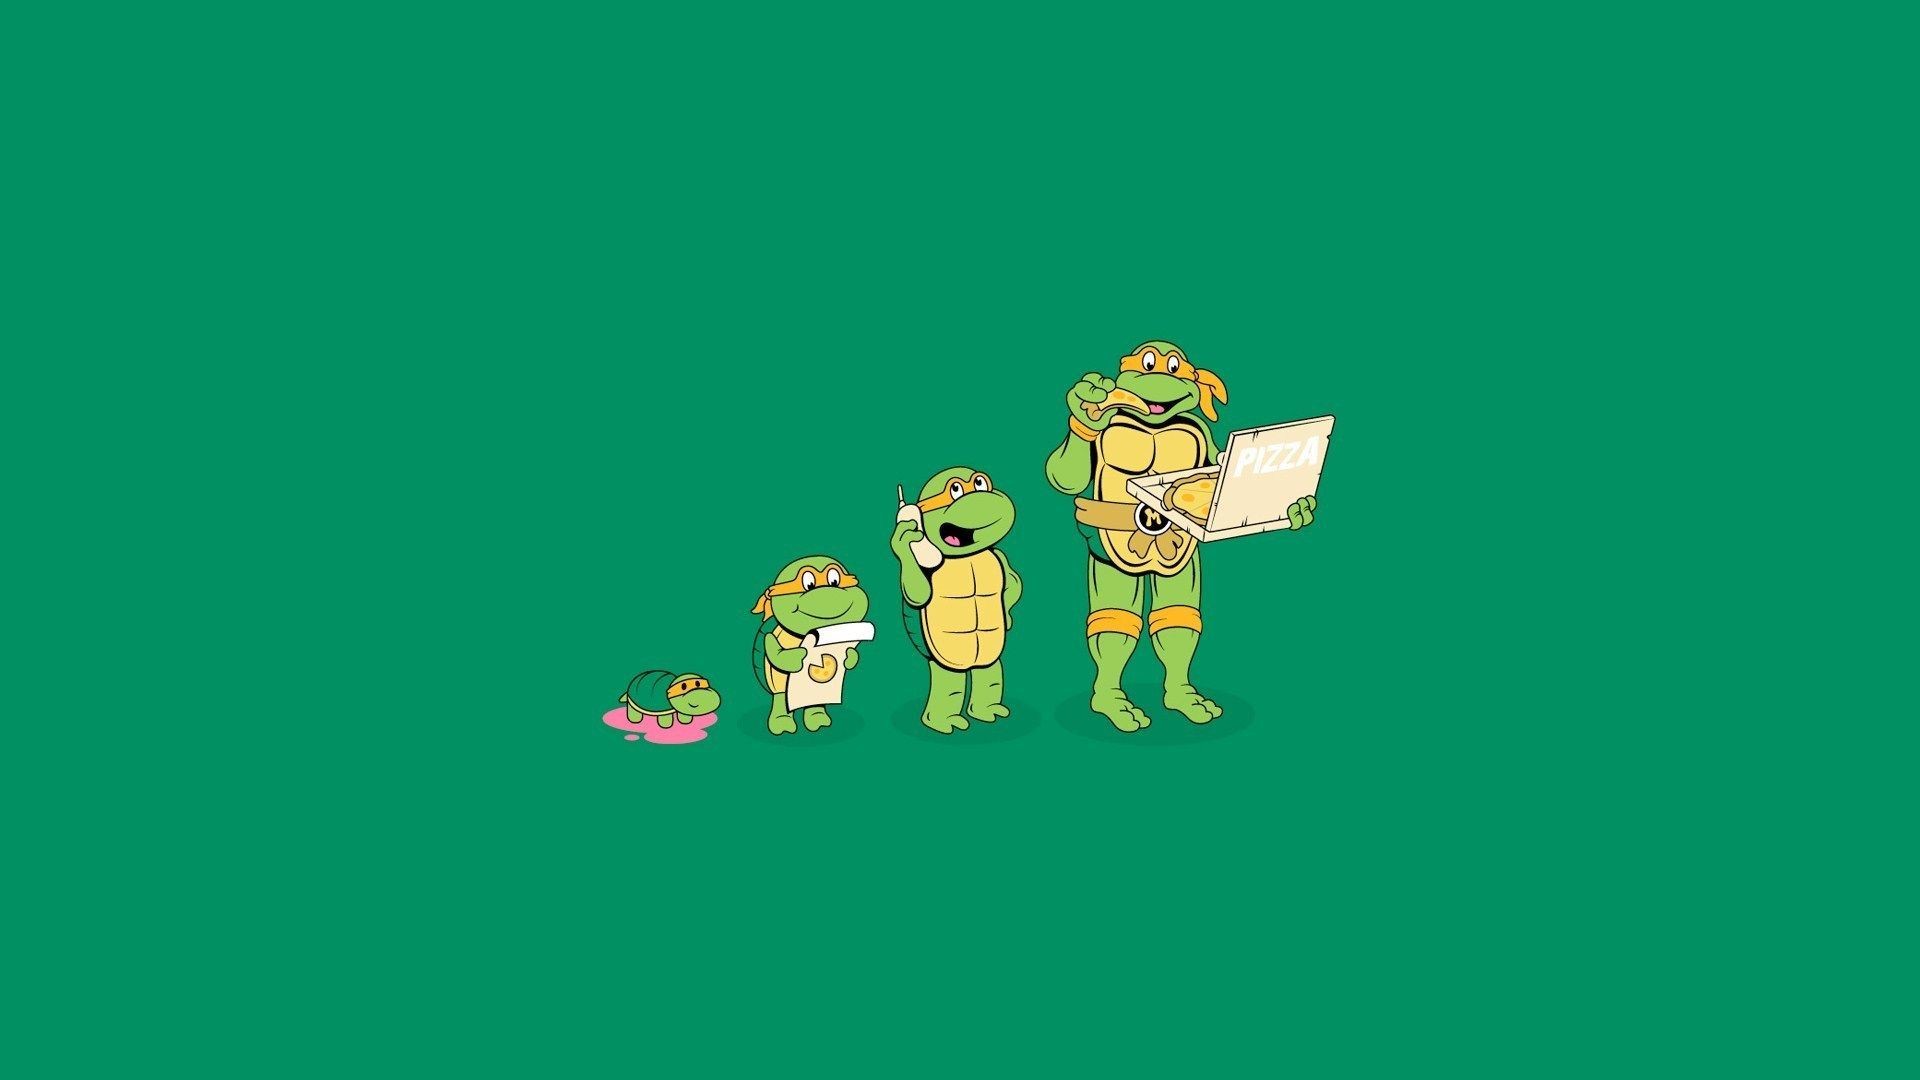 1920x1080 undefined Tmnt Wallpaper (30 Wallpapers) | Adorable Wallpapers